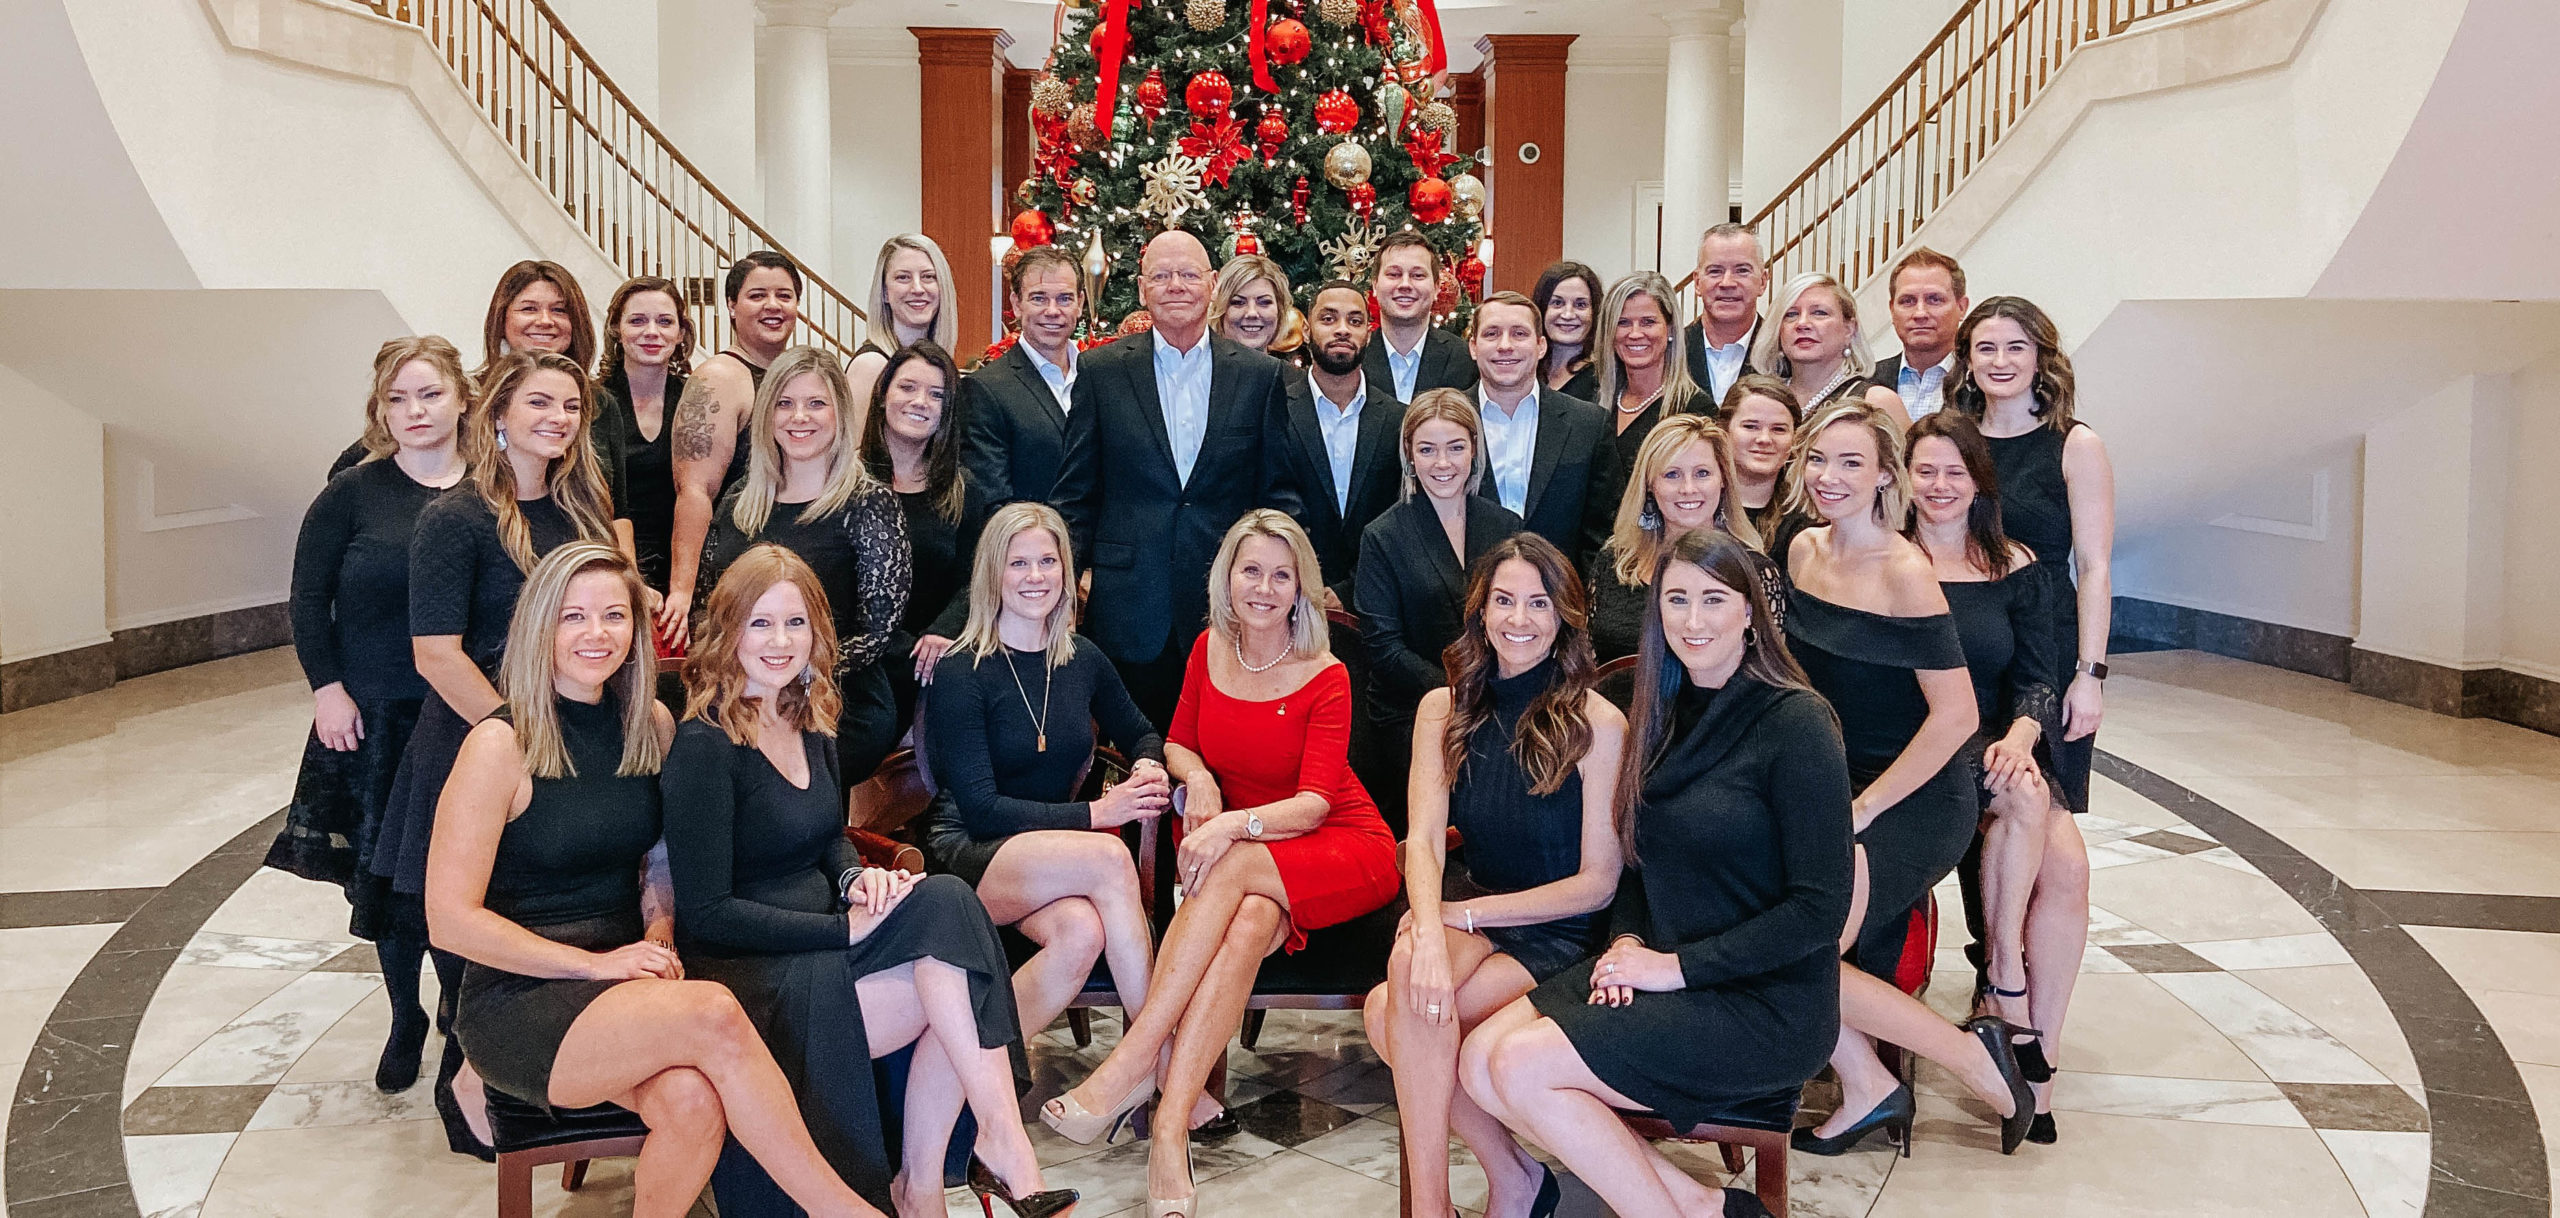 The Rachel Kendall Team in front of a Christmas tree